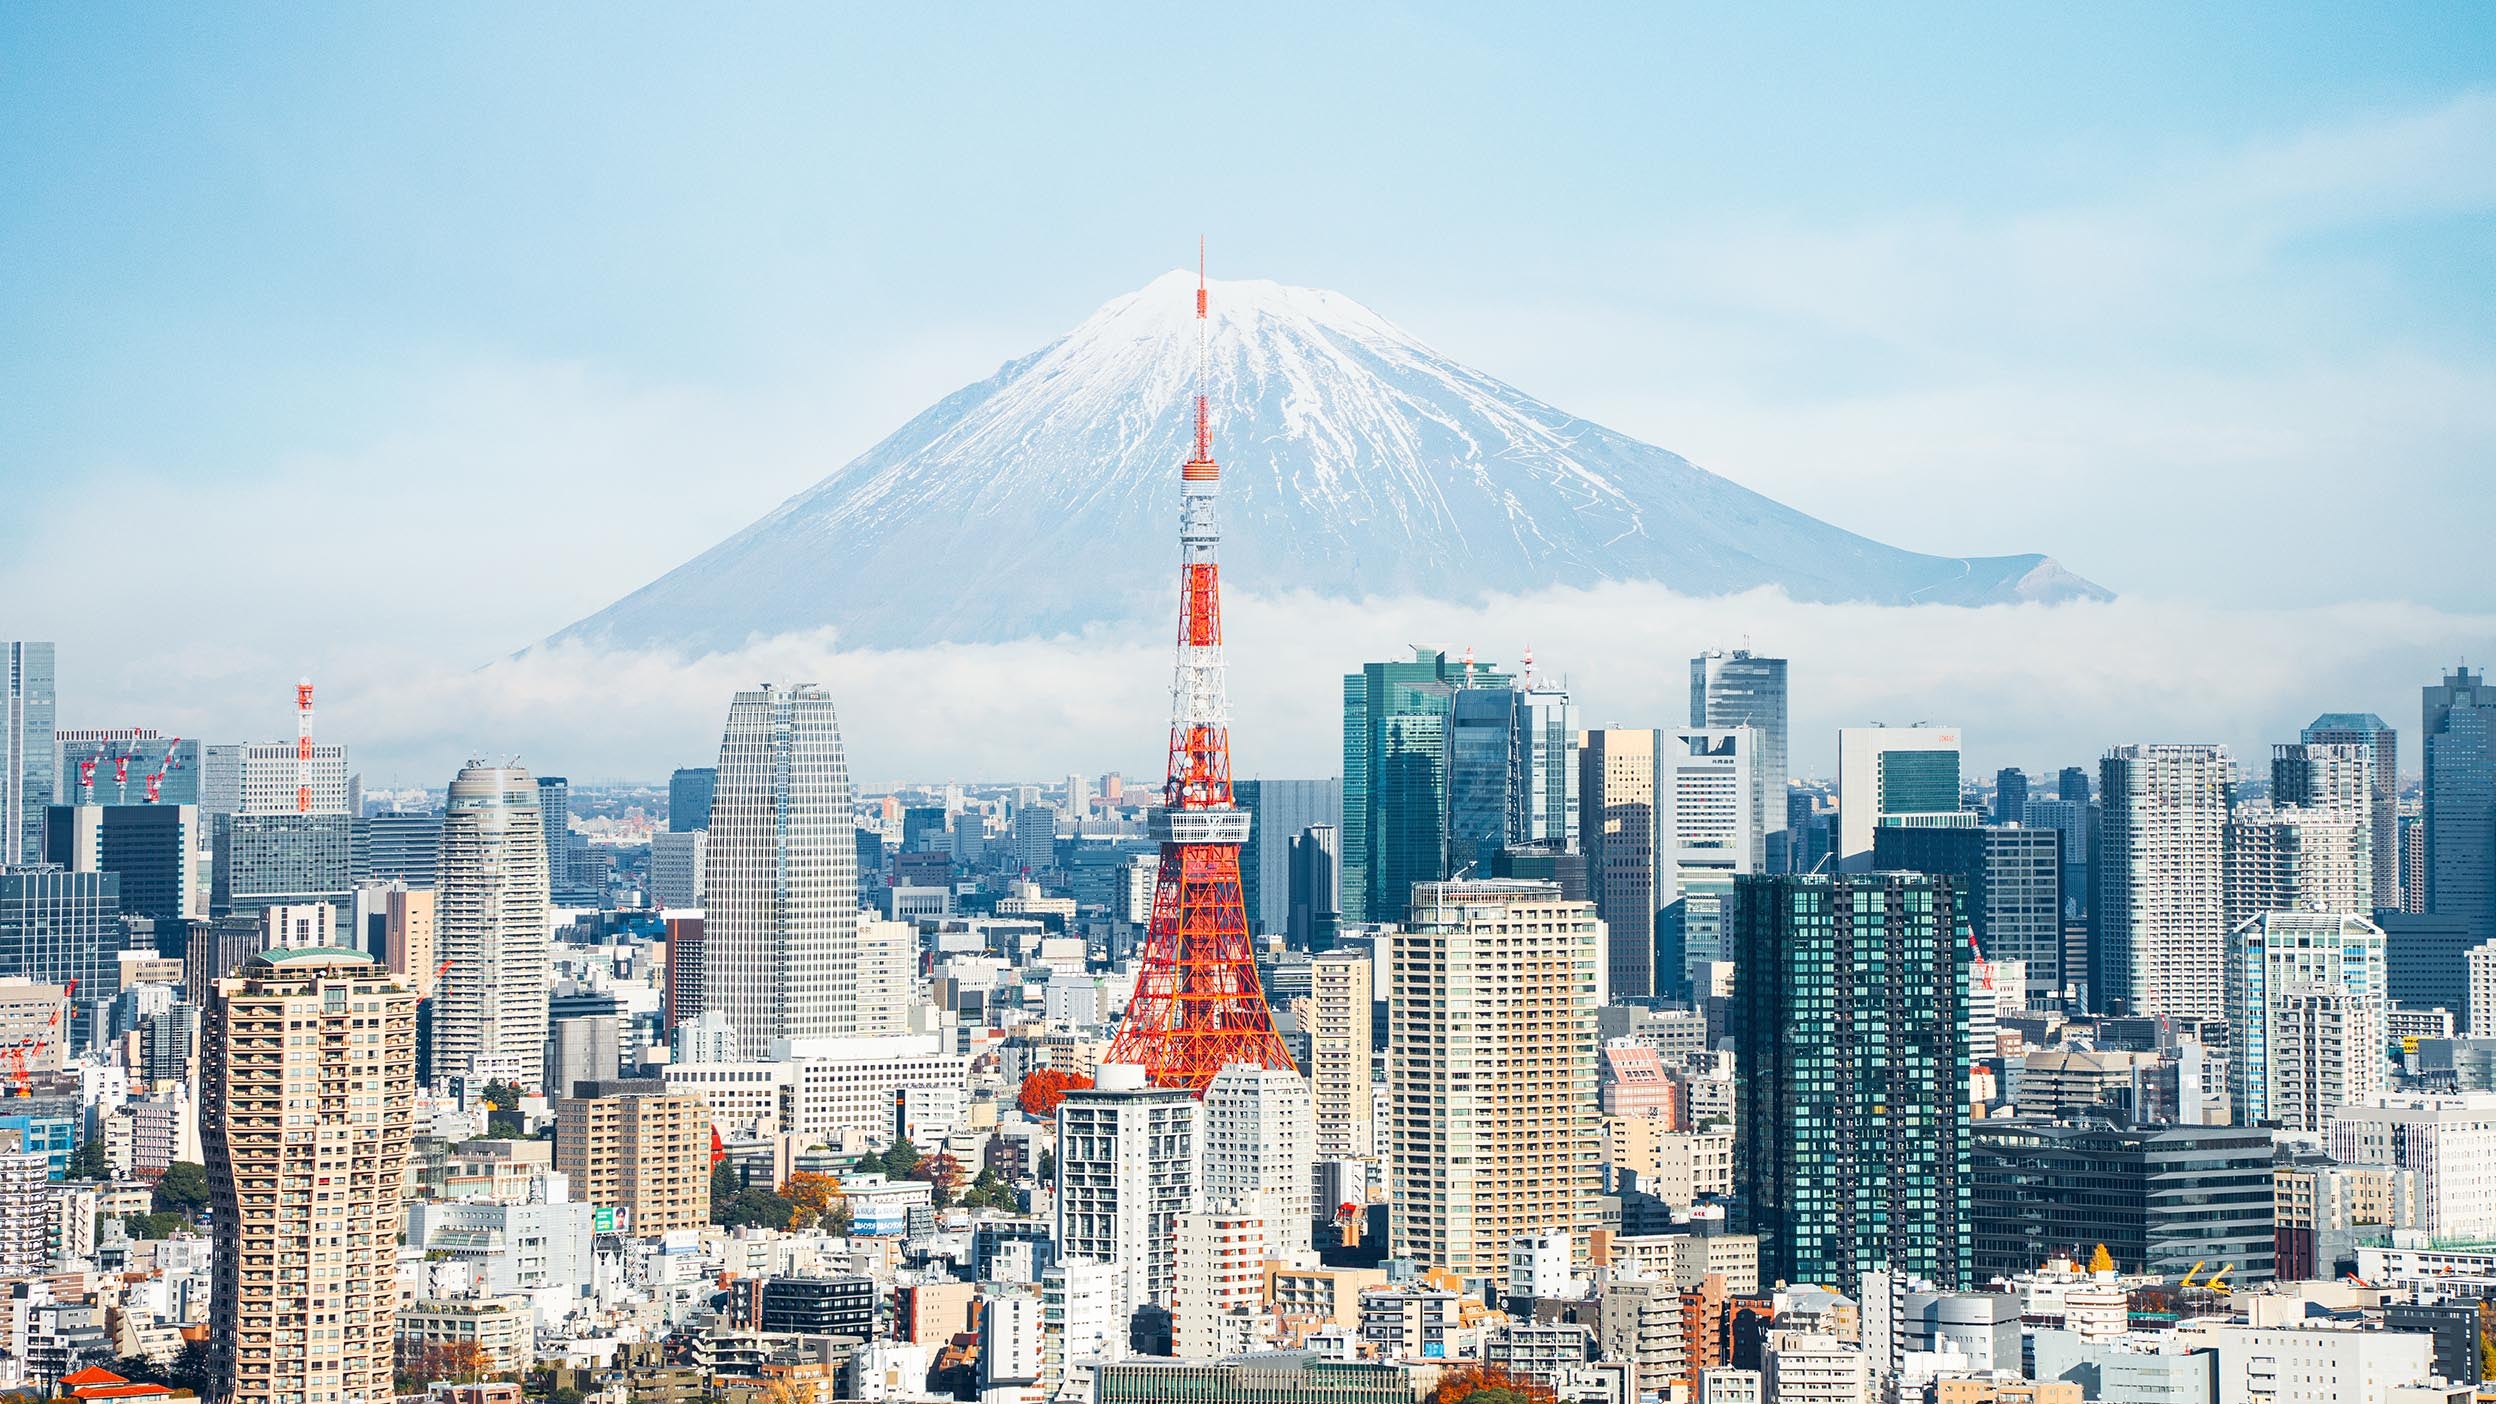 The Japanese stock rally may have more room to run